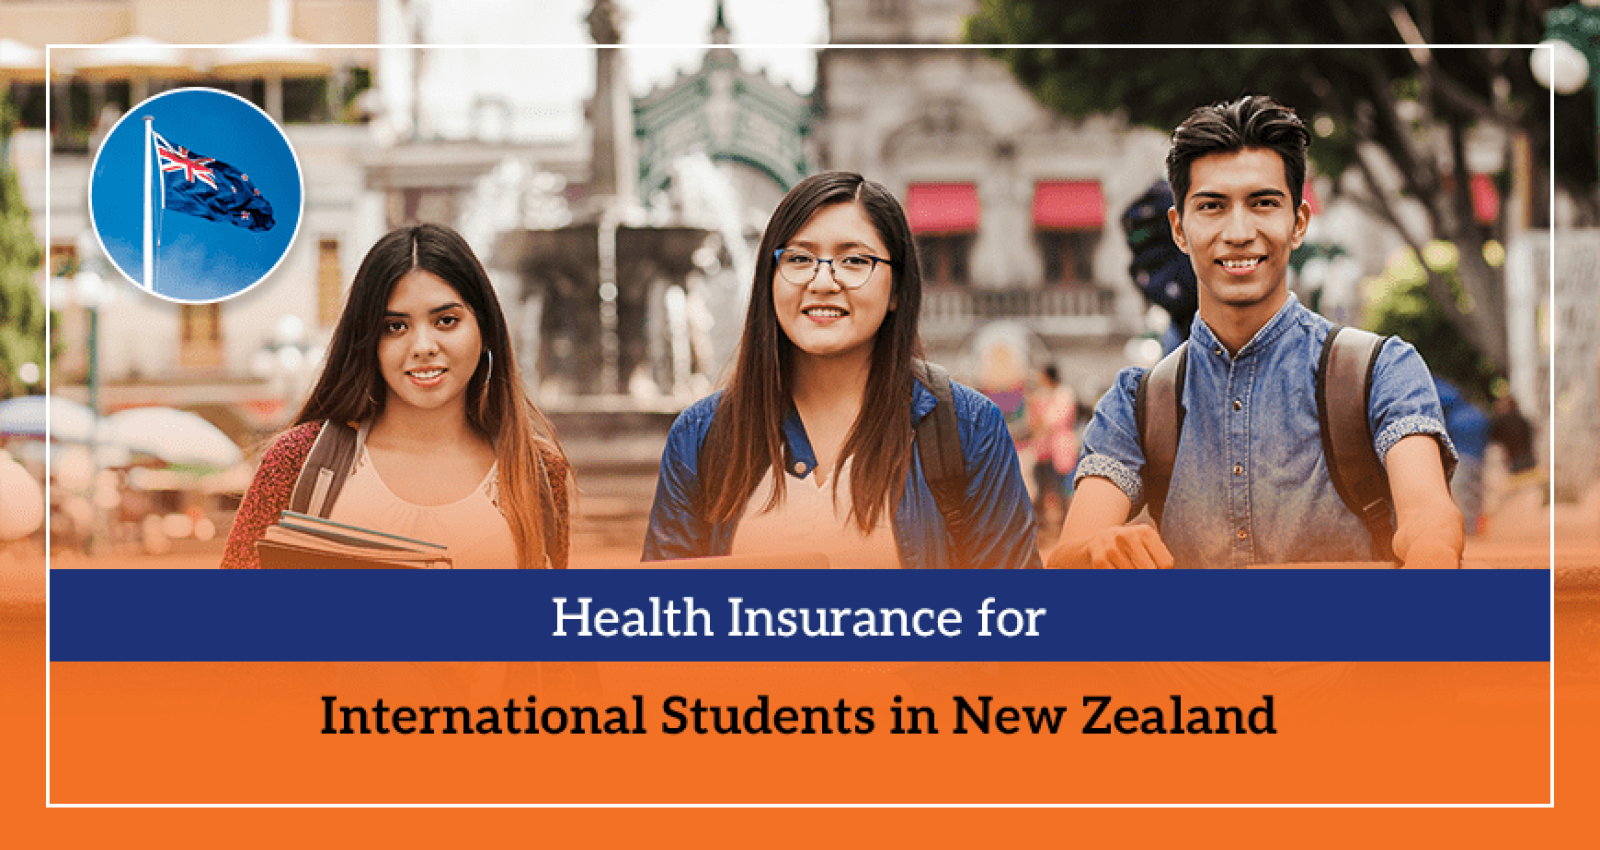 Health Insurance for International Students in New Zealand